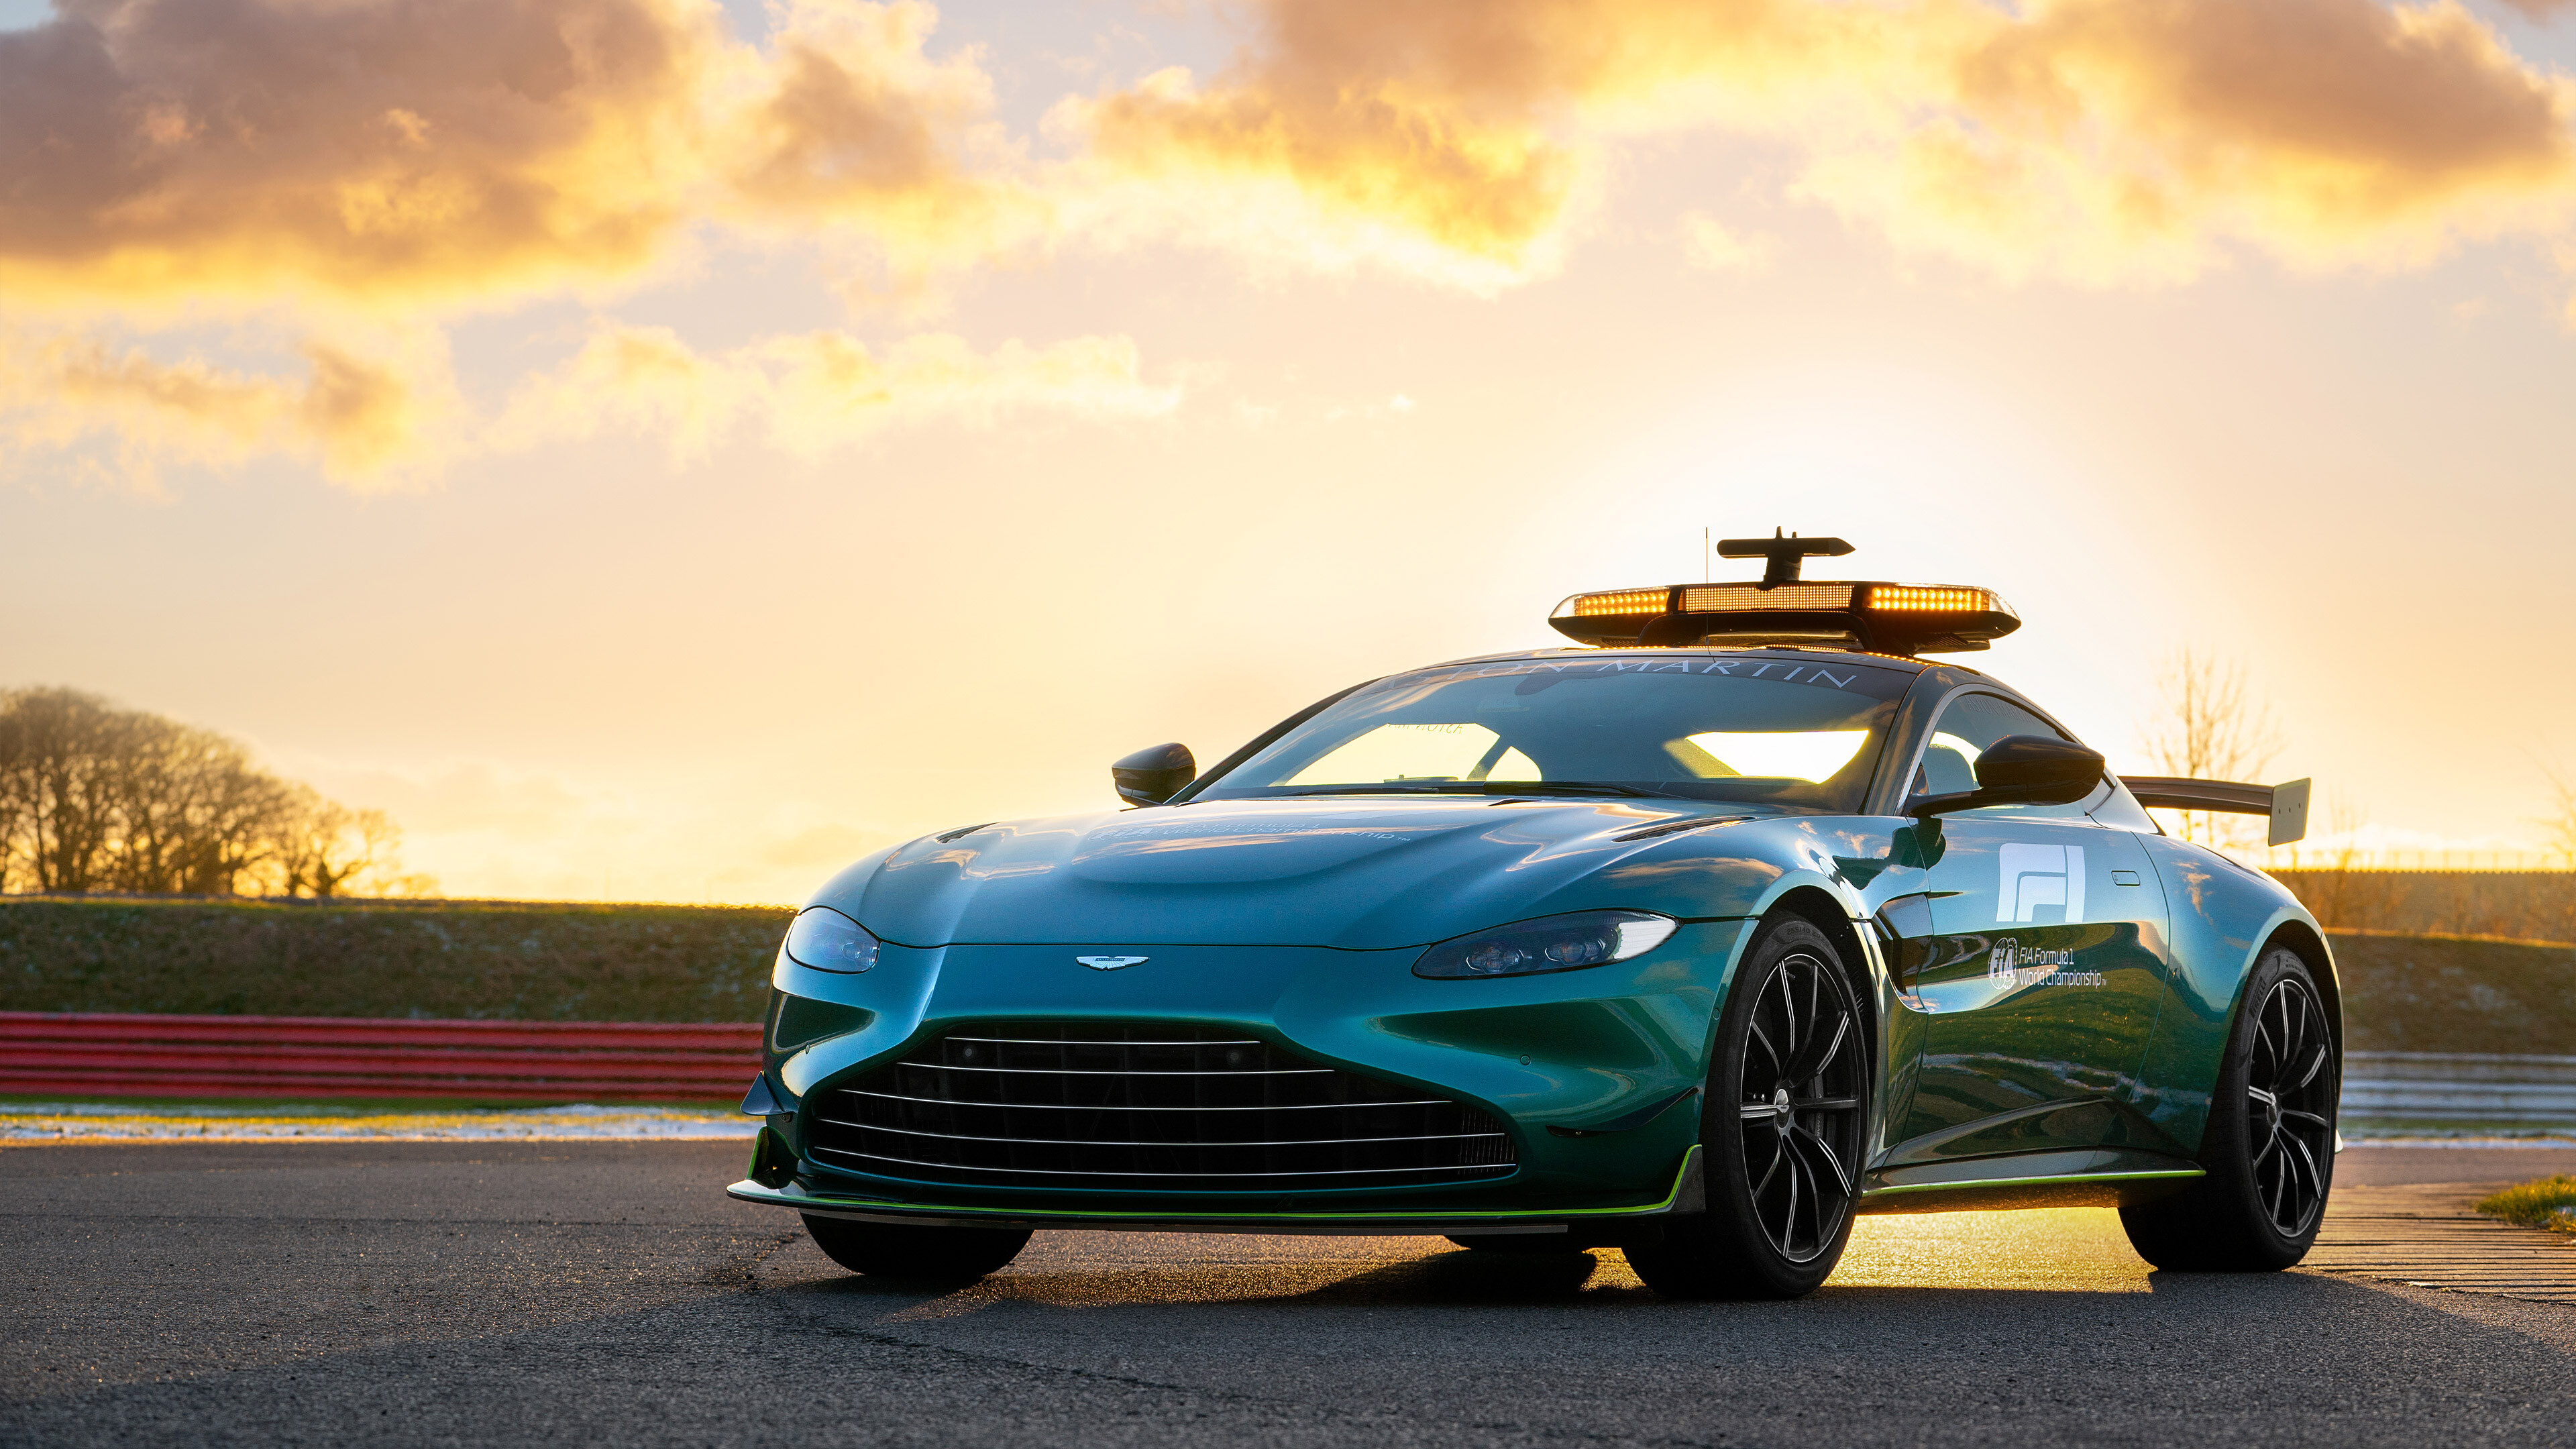 Aston Martin: Vantage F1, A two-seater sports car, Manufacturer of luxury vehicles. 3840x2160 4K Wallpaper.